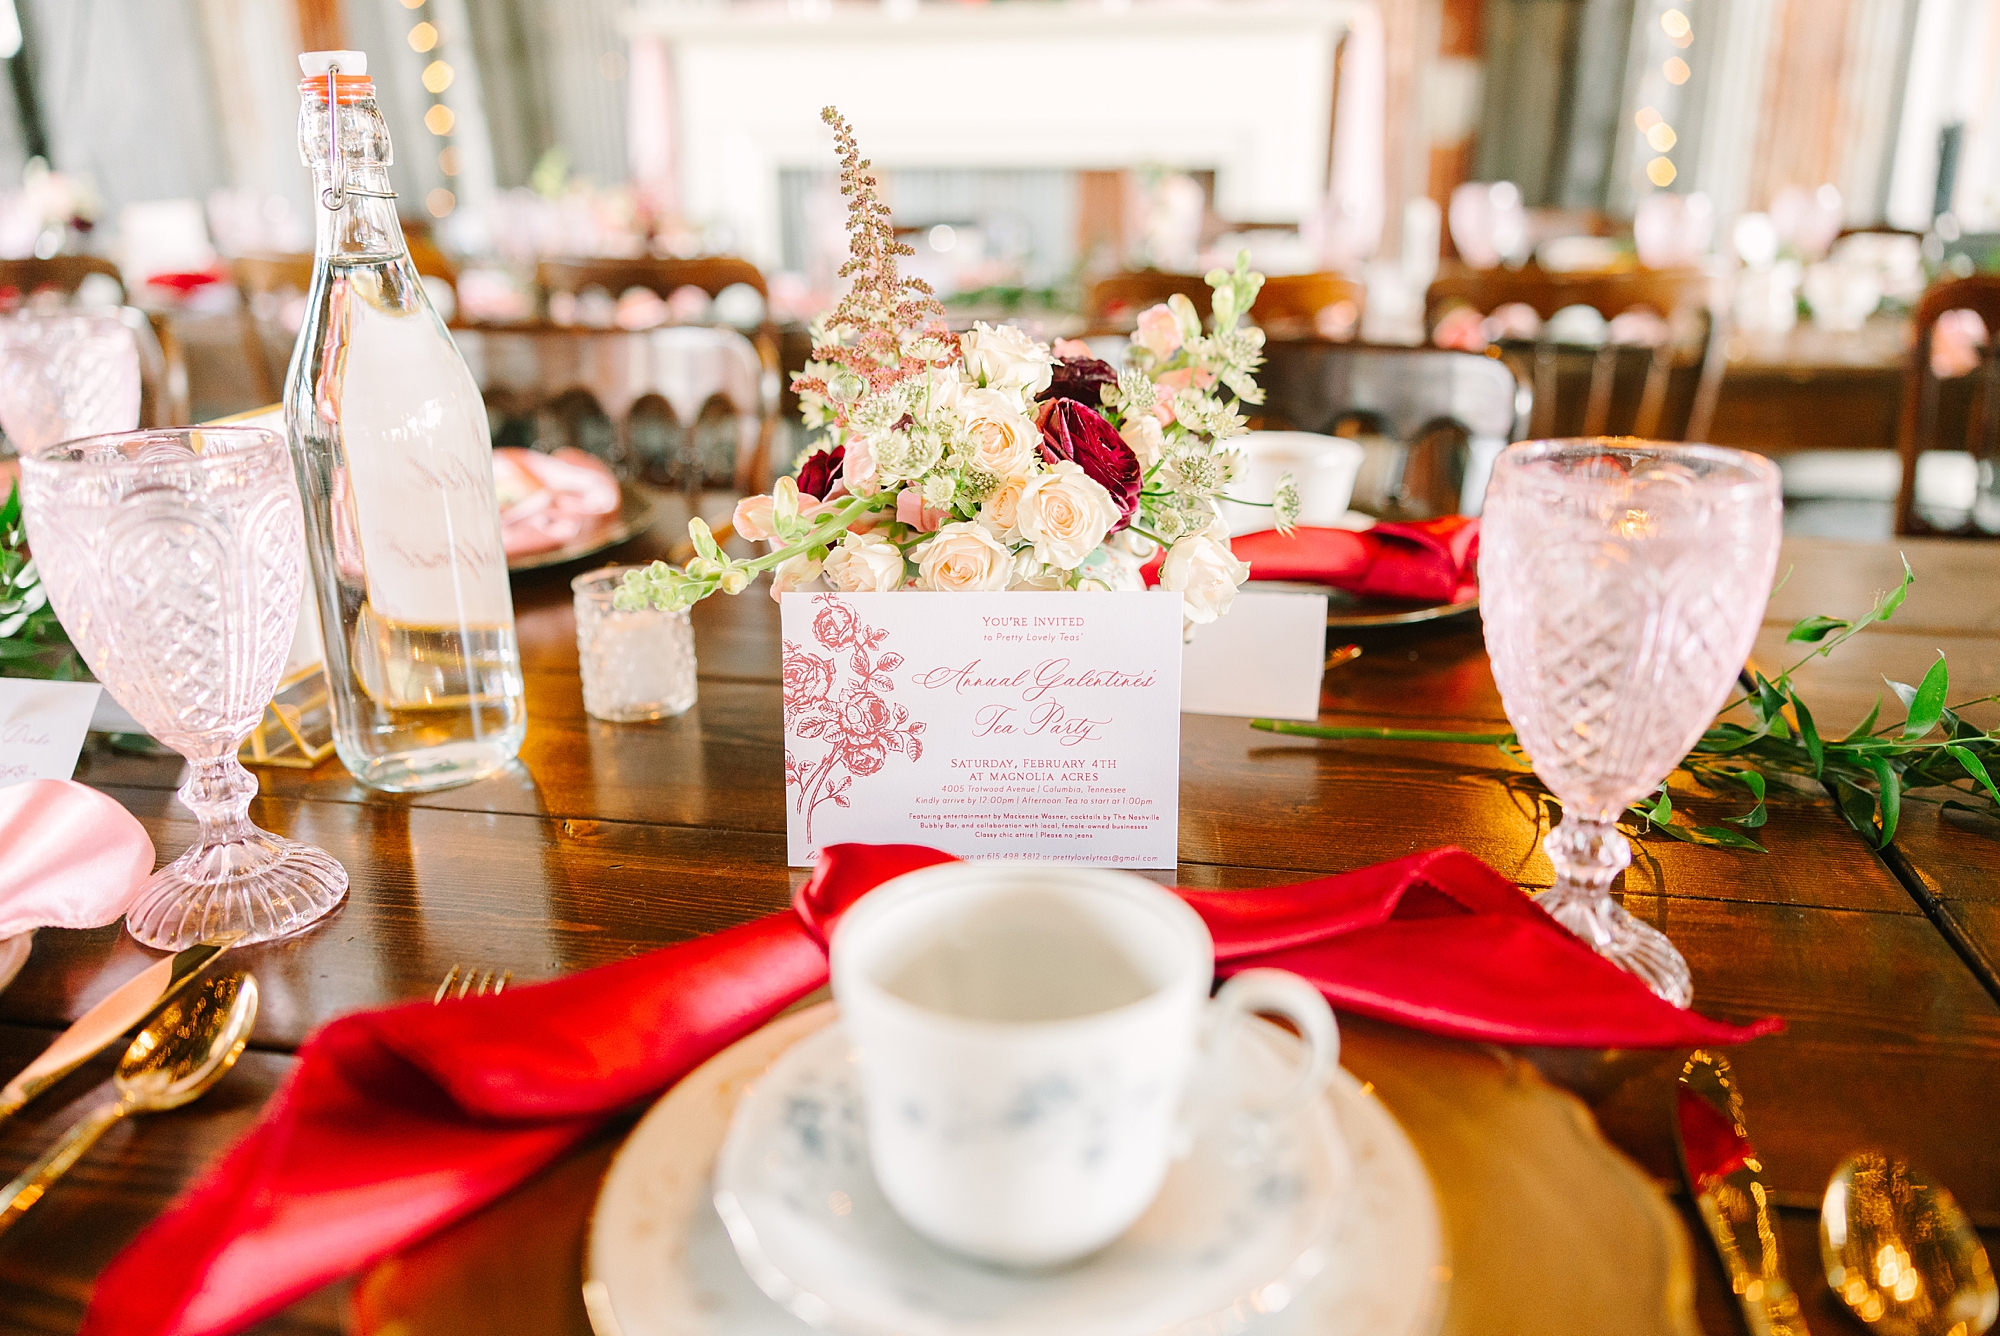 place settings for Galentine's Day Tea Party with vintage pink glasses